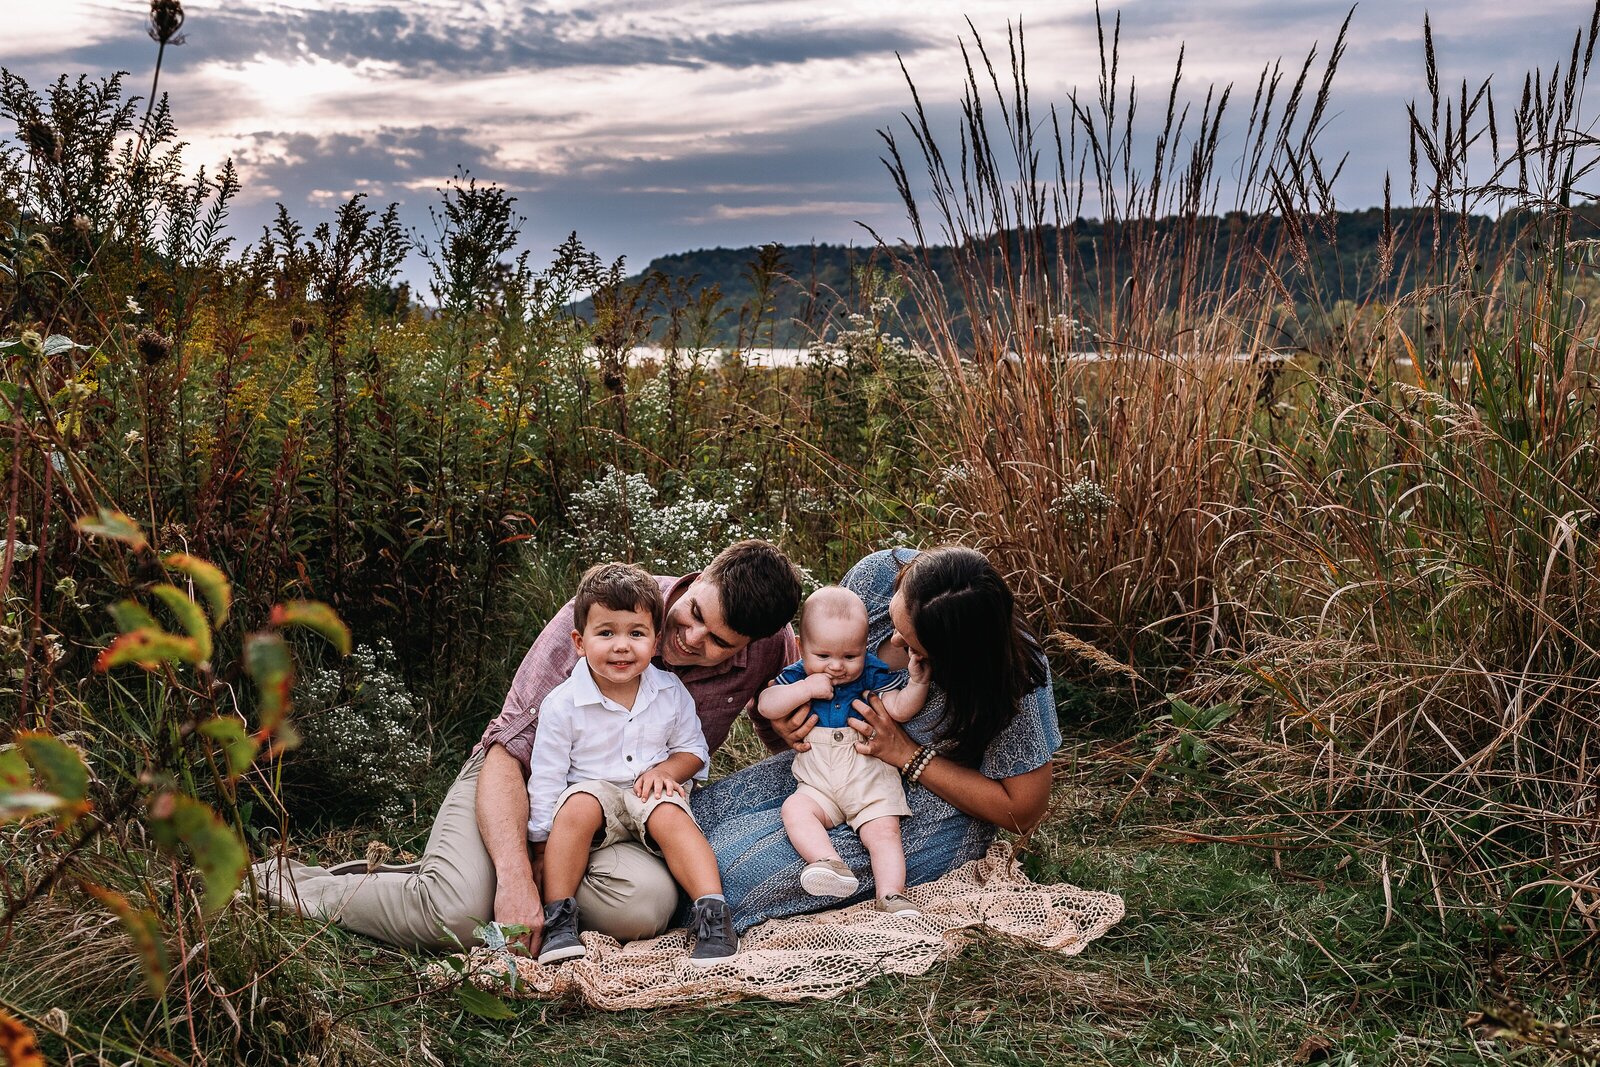 Parents sitting on lace blanket holding toddler and baby in a tall field of grass and flowers, sunset and lake behind them.